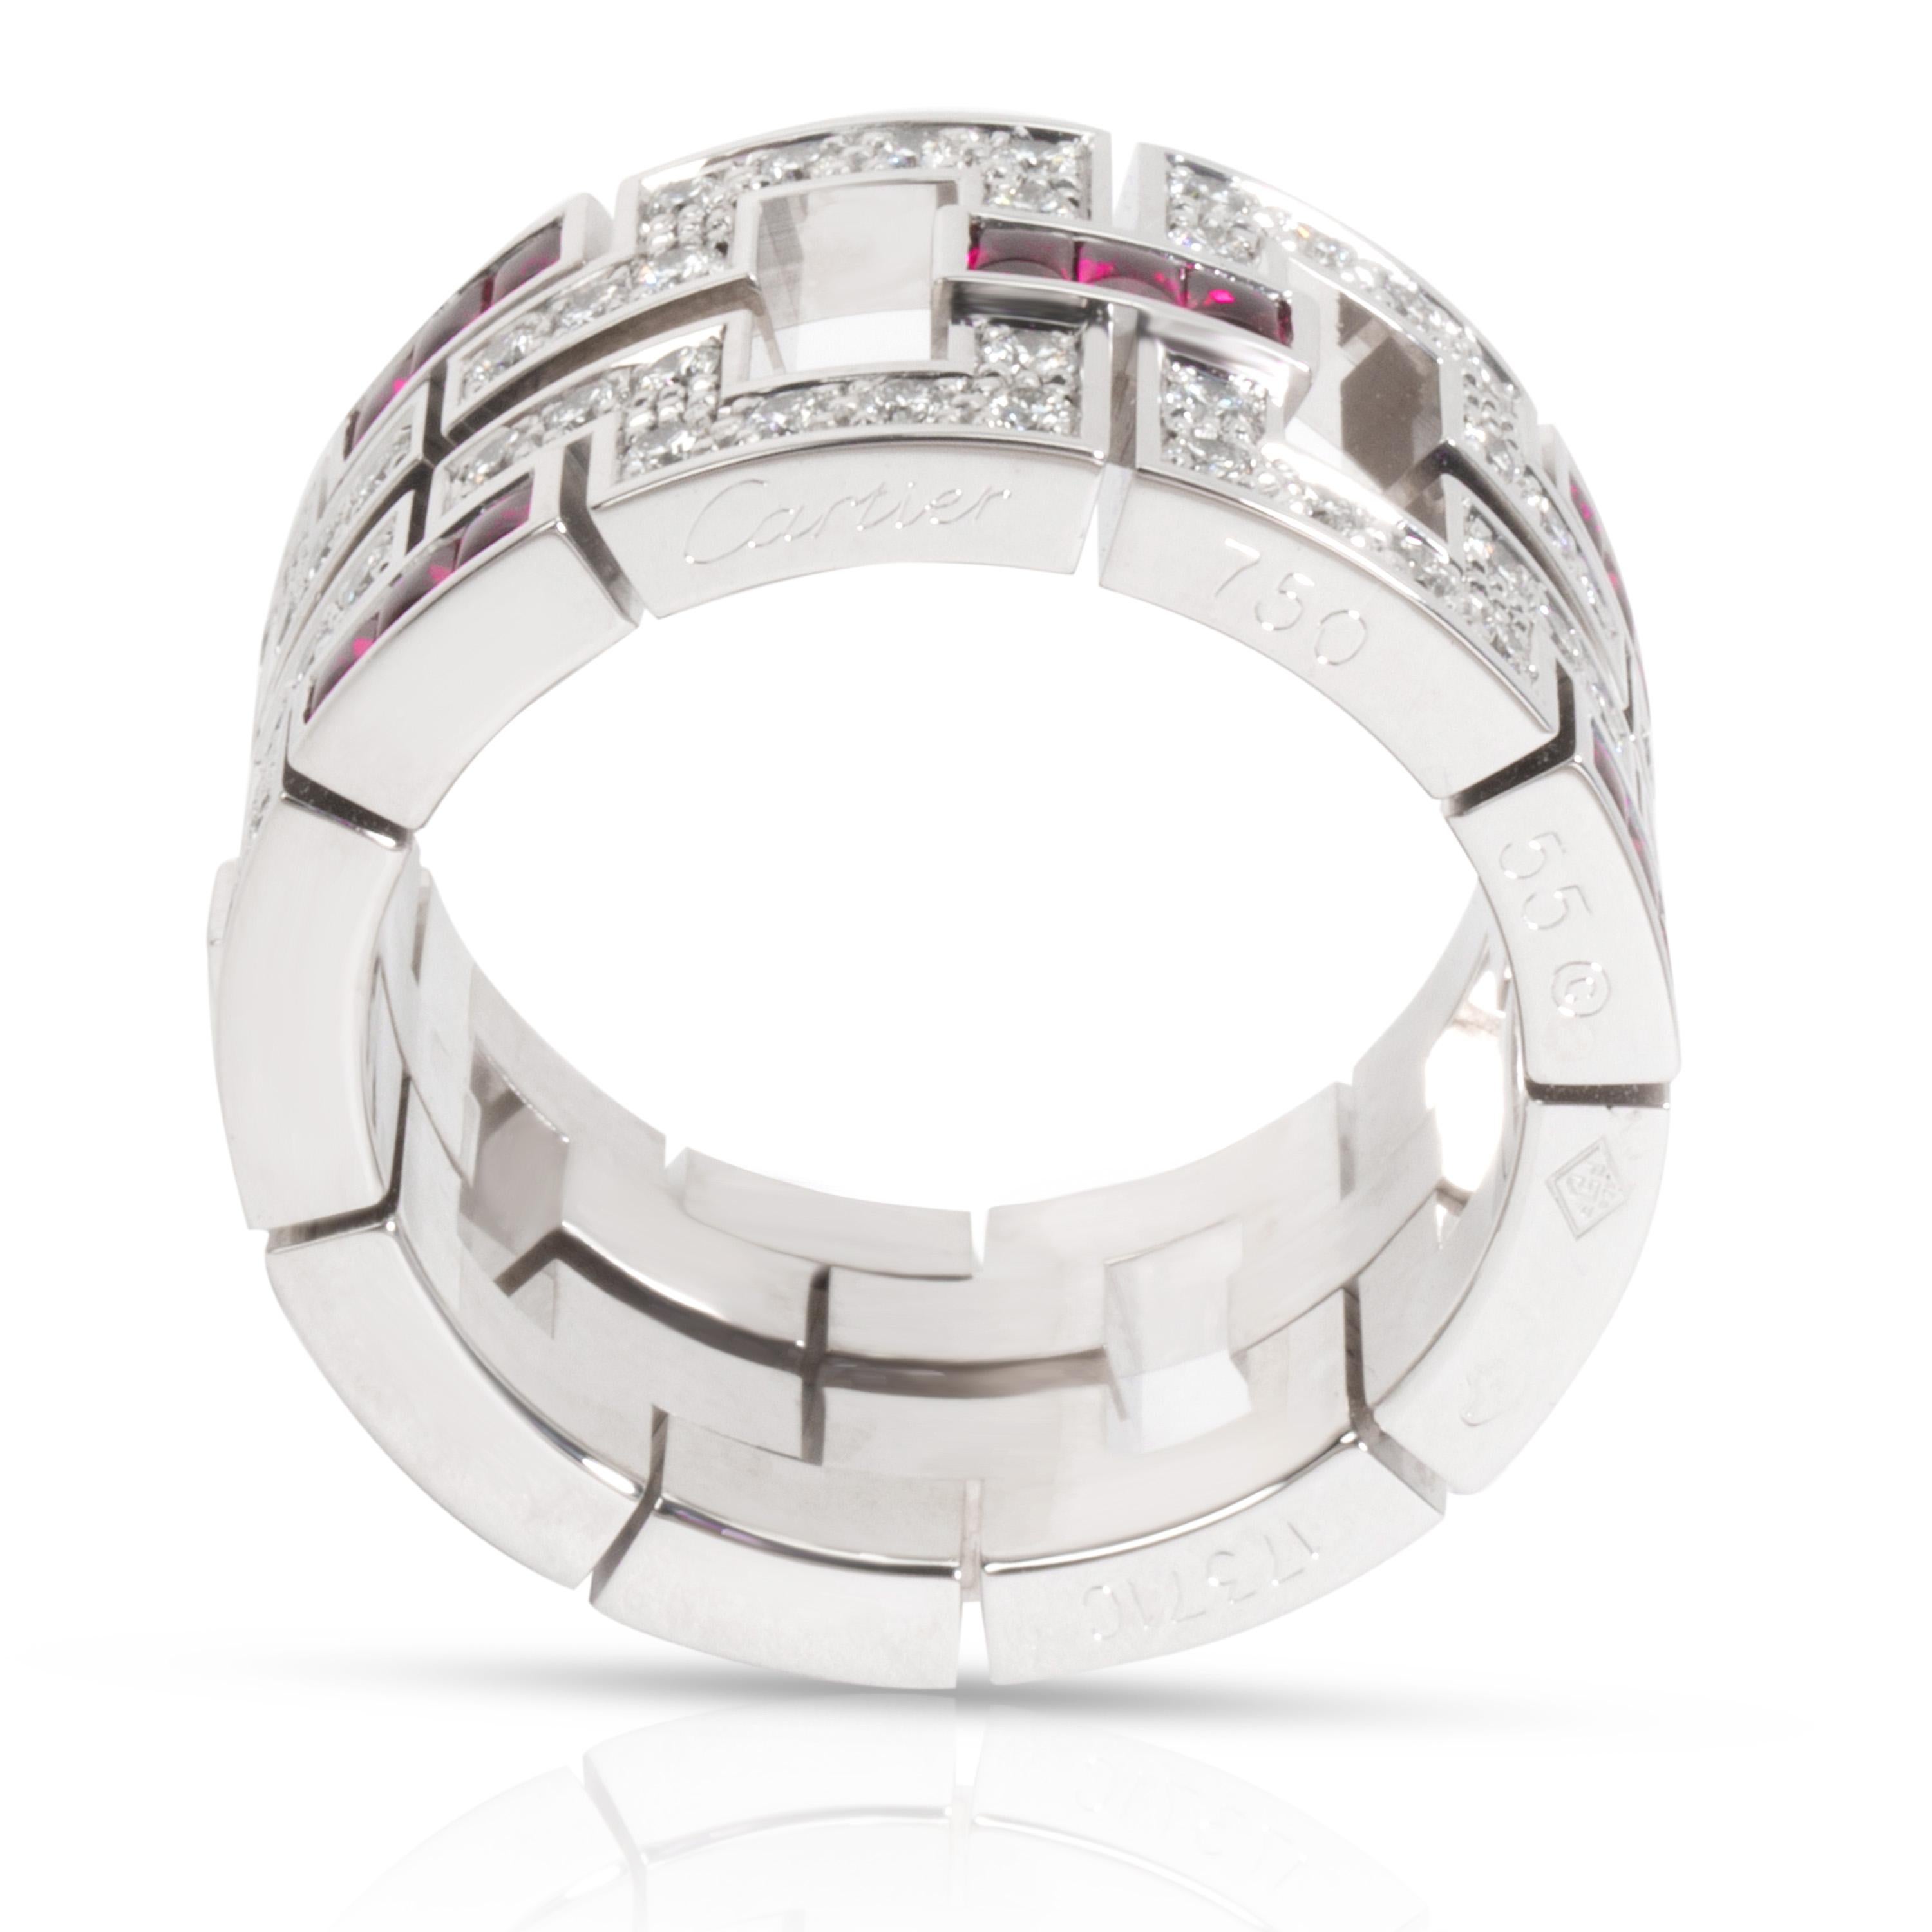 Round Cut Cartier Diamond and Ruby Band in 18 Karat White Gold 0.95 Carat